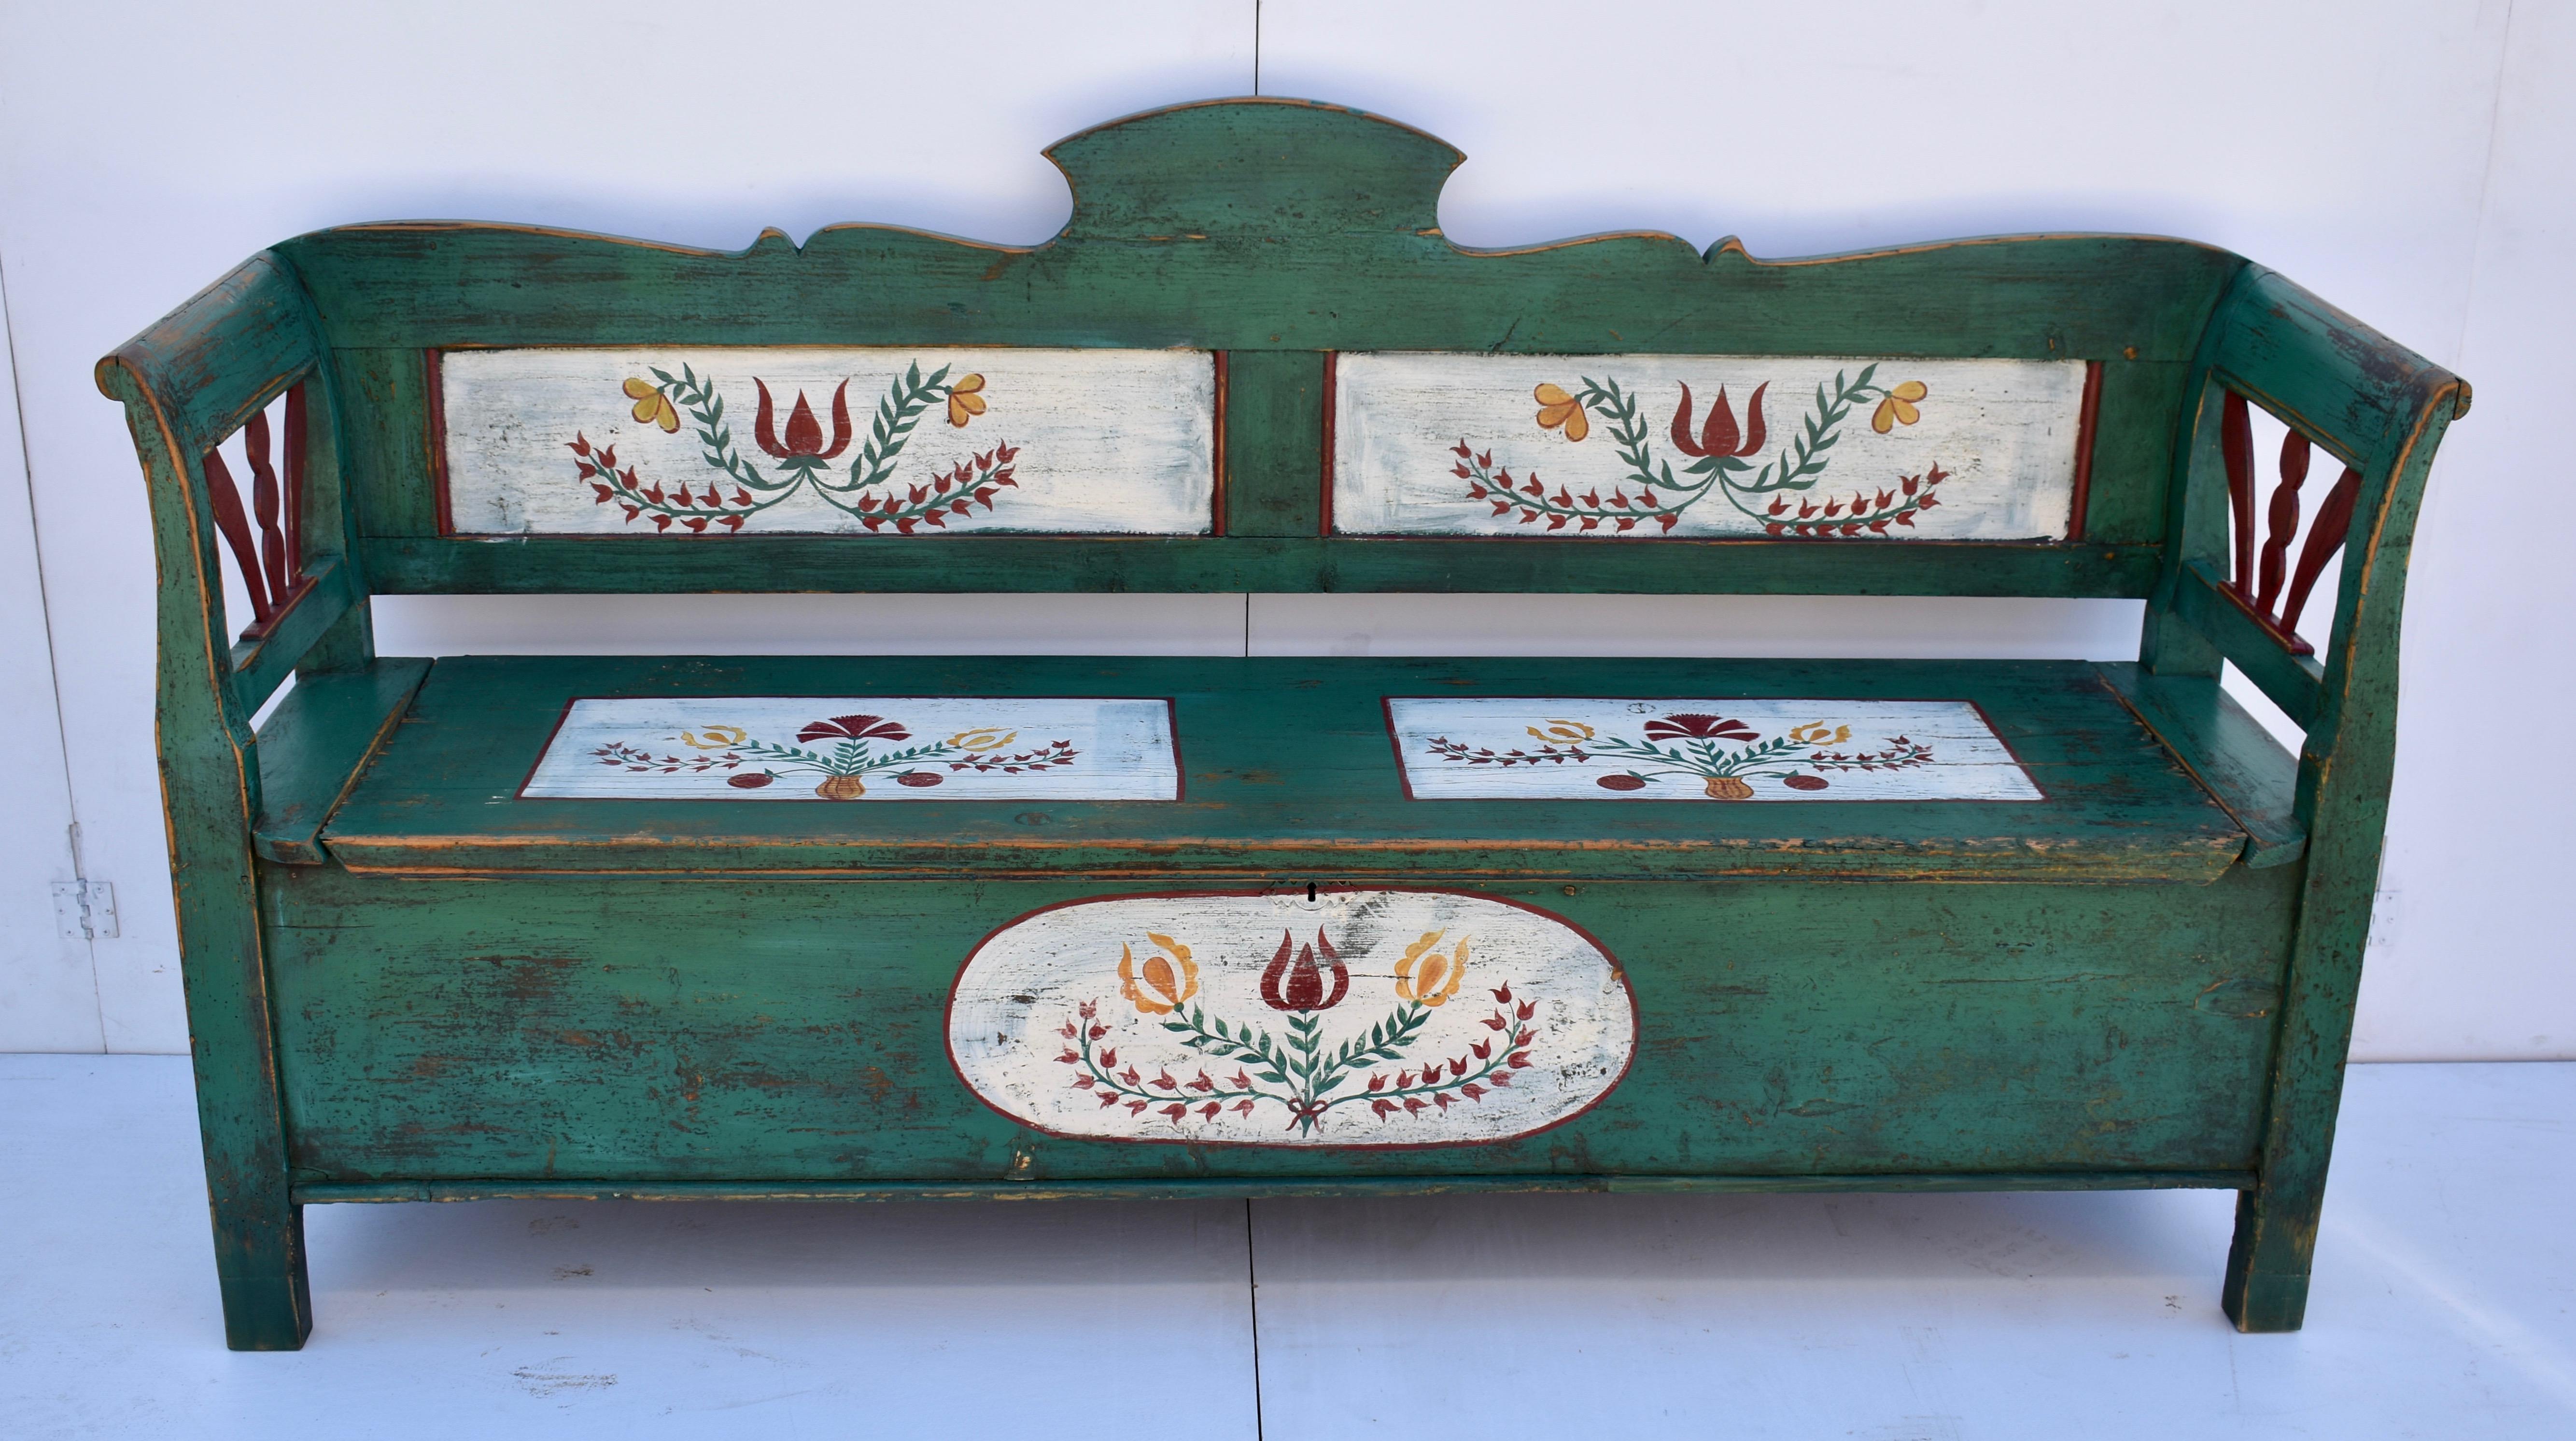 This handsome Hungarian Box Bench has a gently scalloped back rail with a tall cartouche in the center, above two flat panels, recently re-painted in white as a ground for the folk art floral work within. The faux panels on the seat and the oval